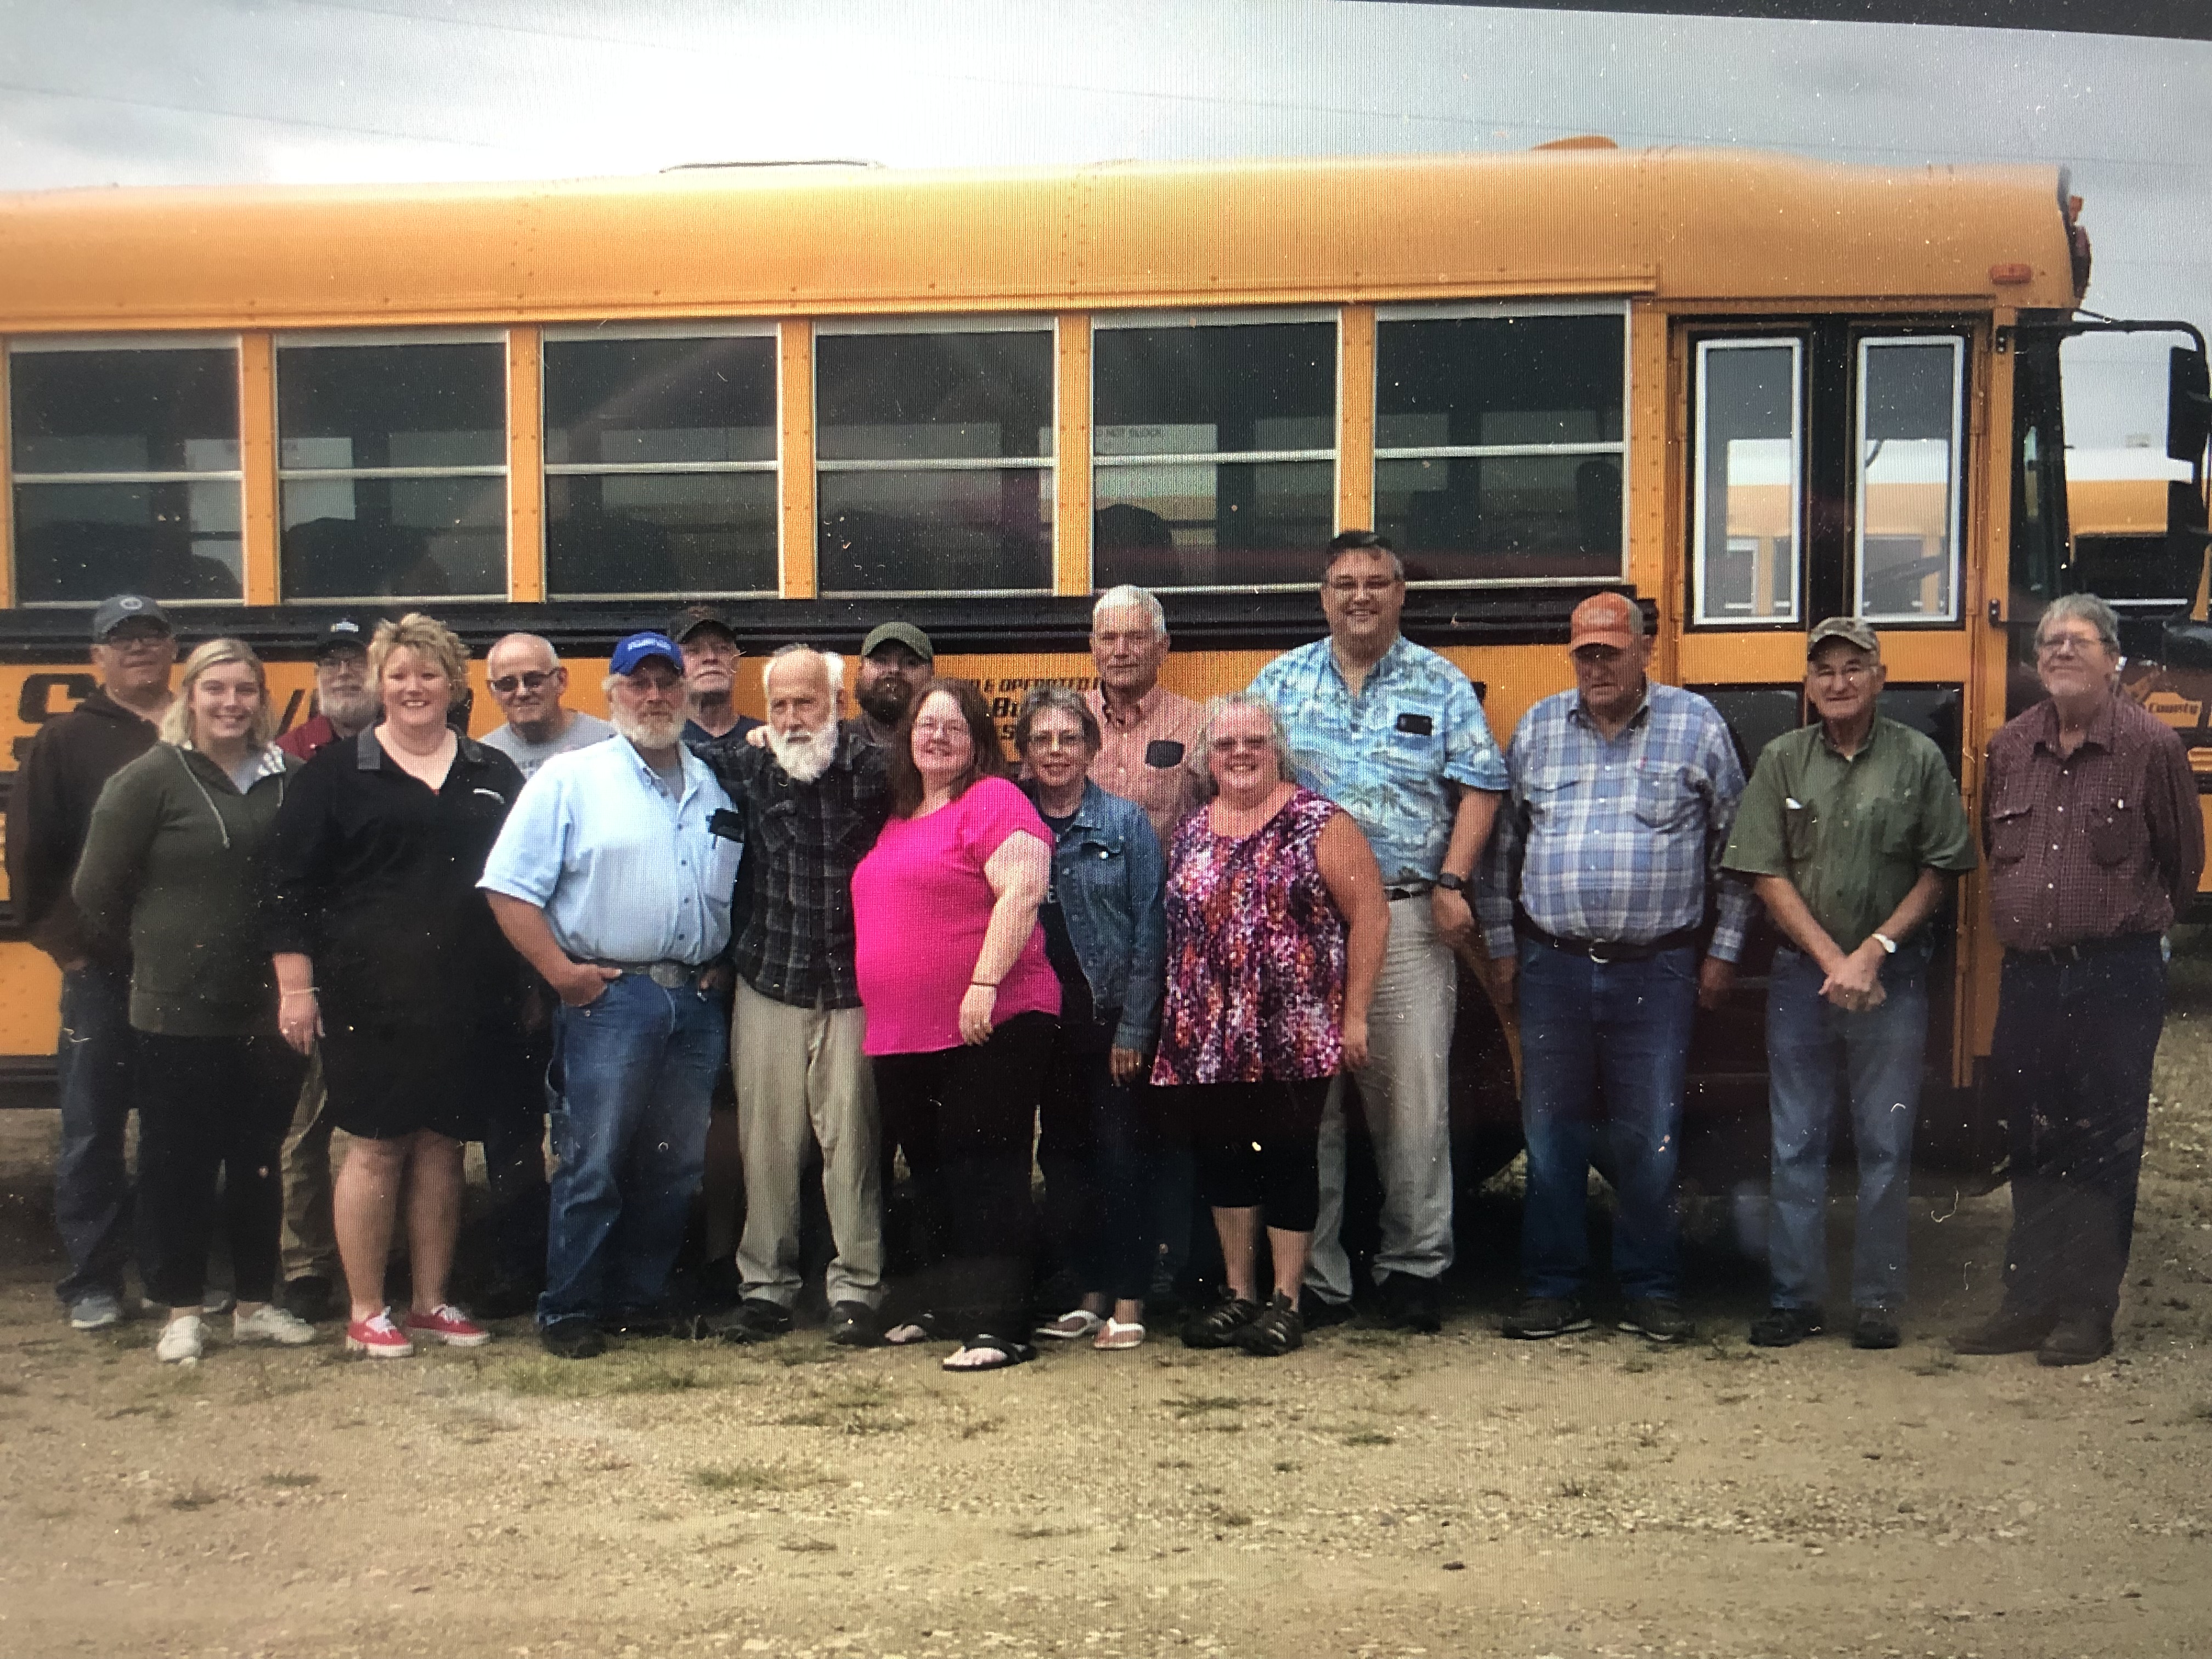 a group of 17 people in front of a bus